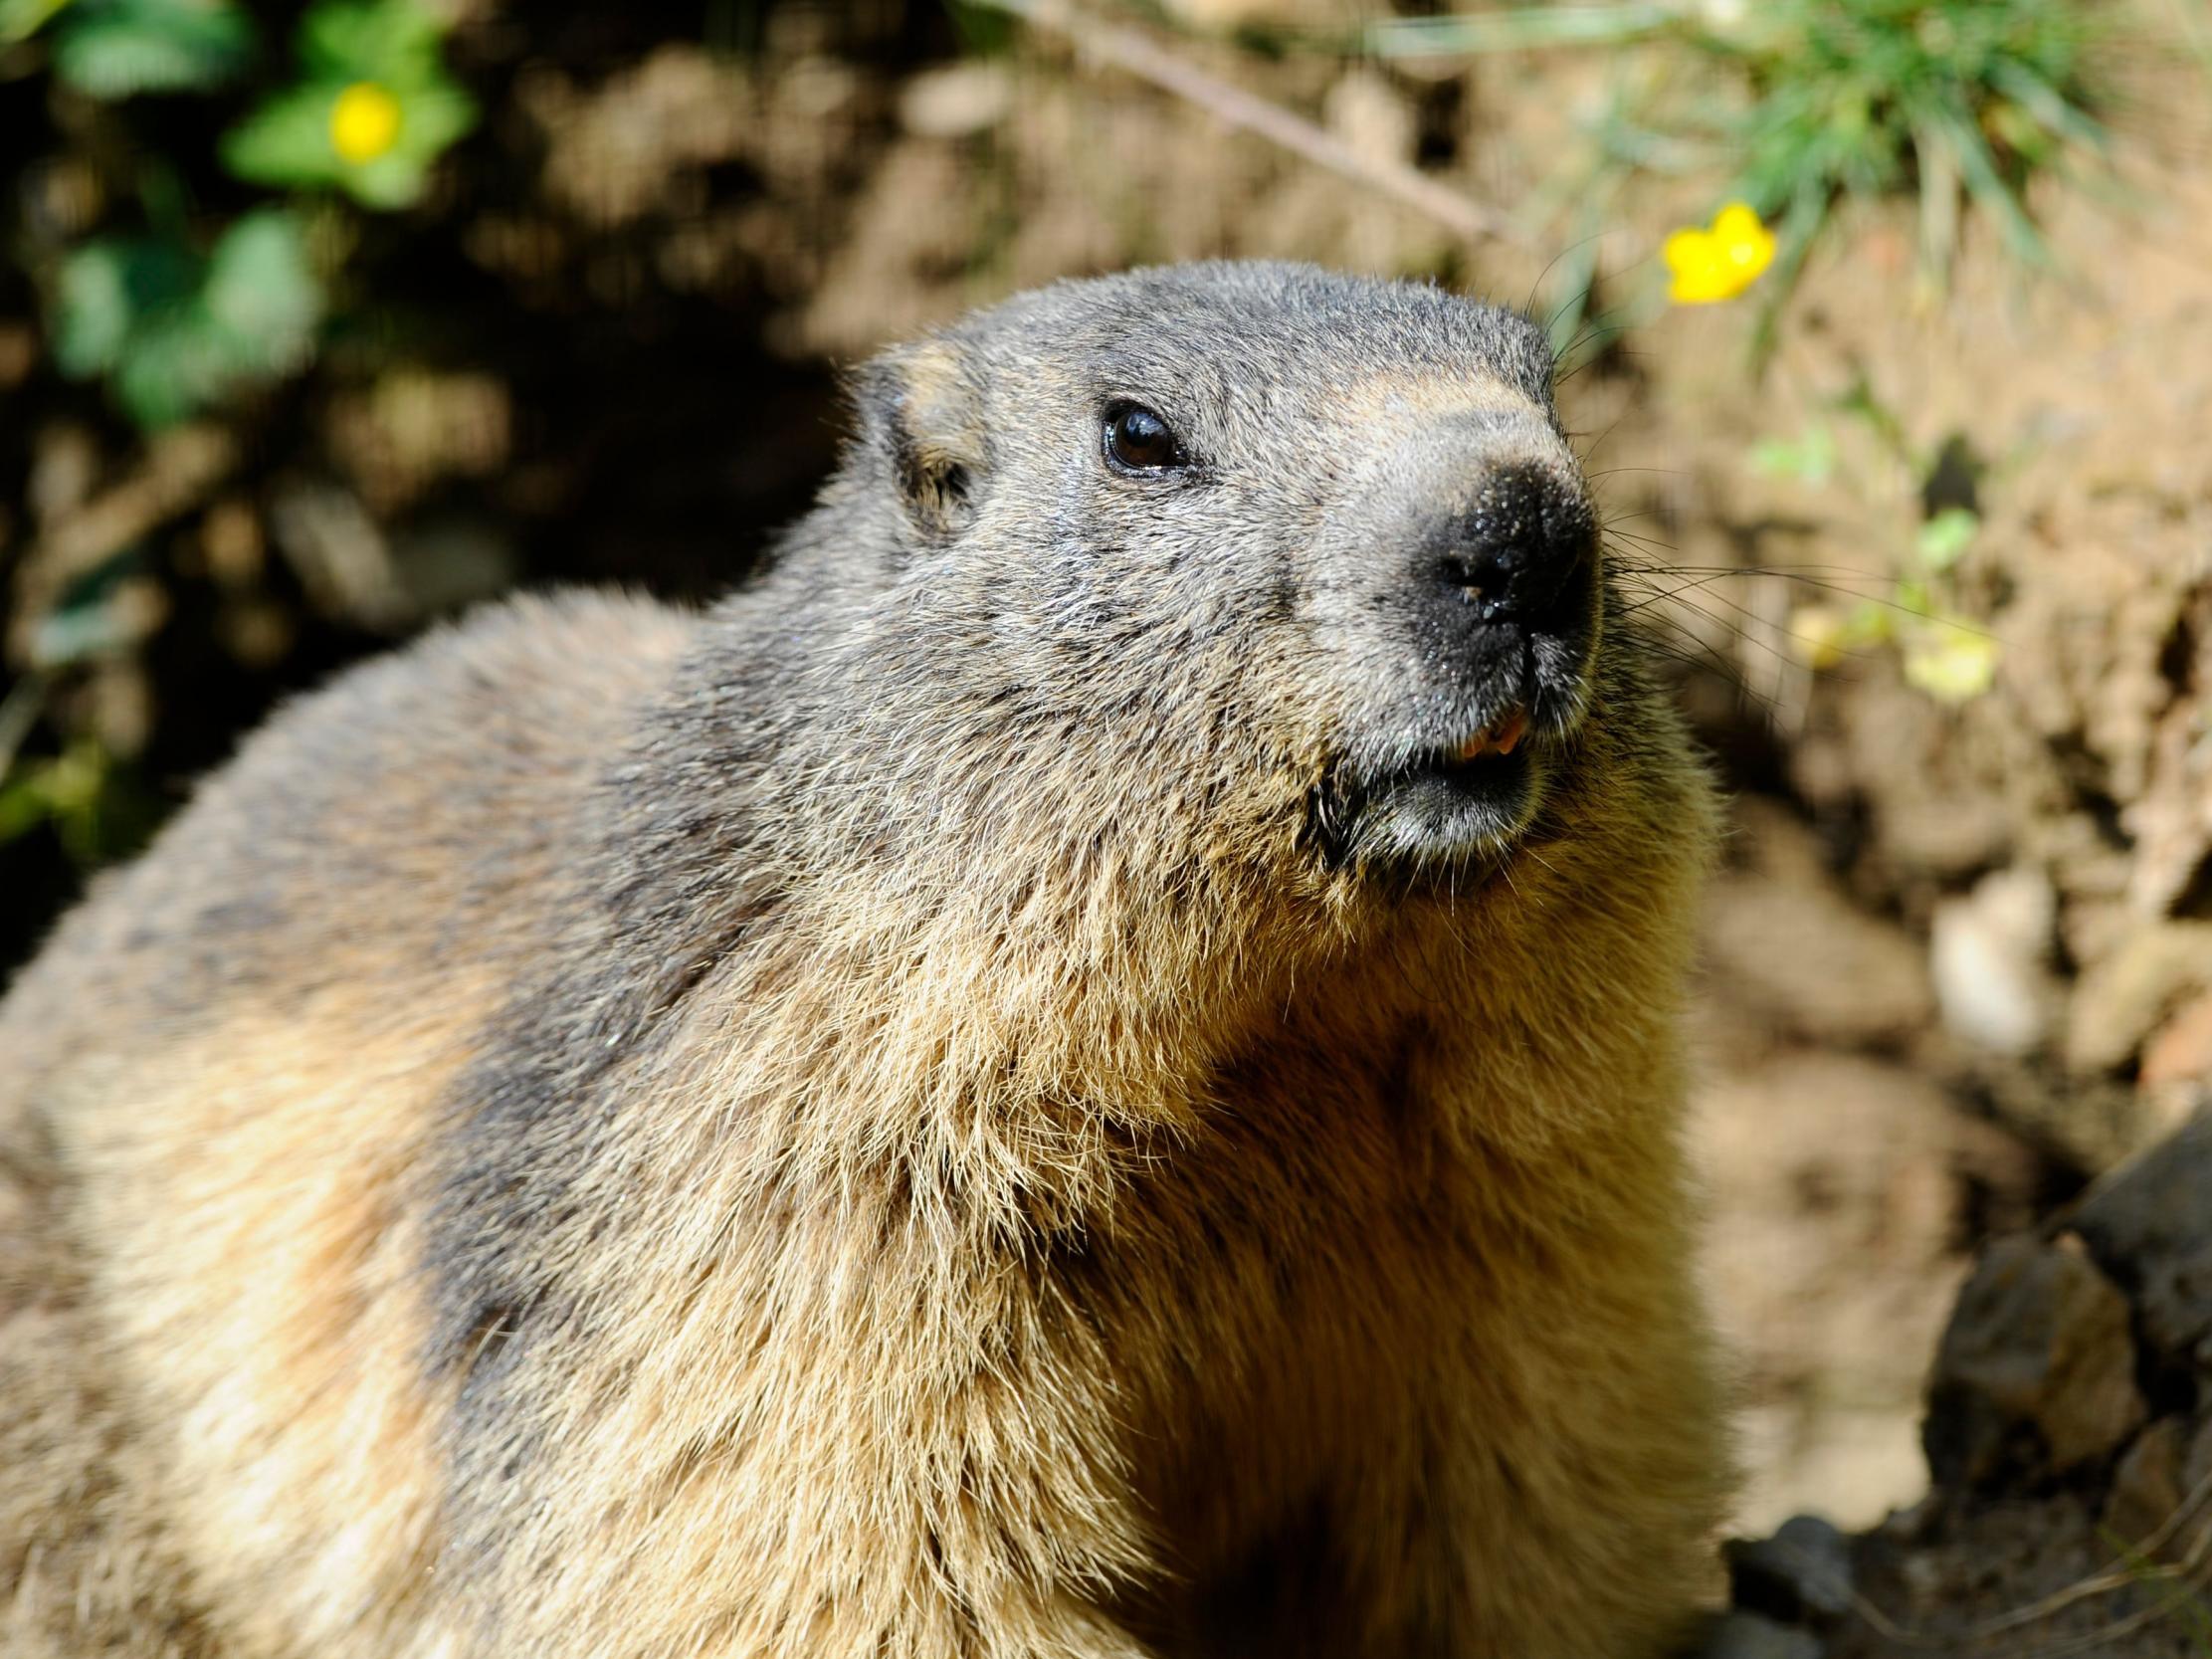 Marmots are known carriers of the disease